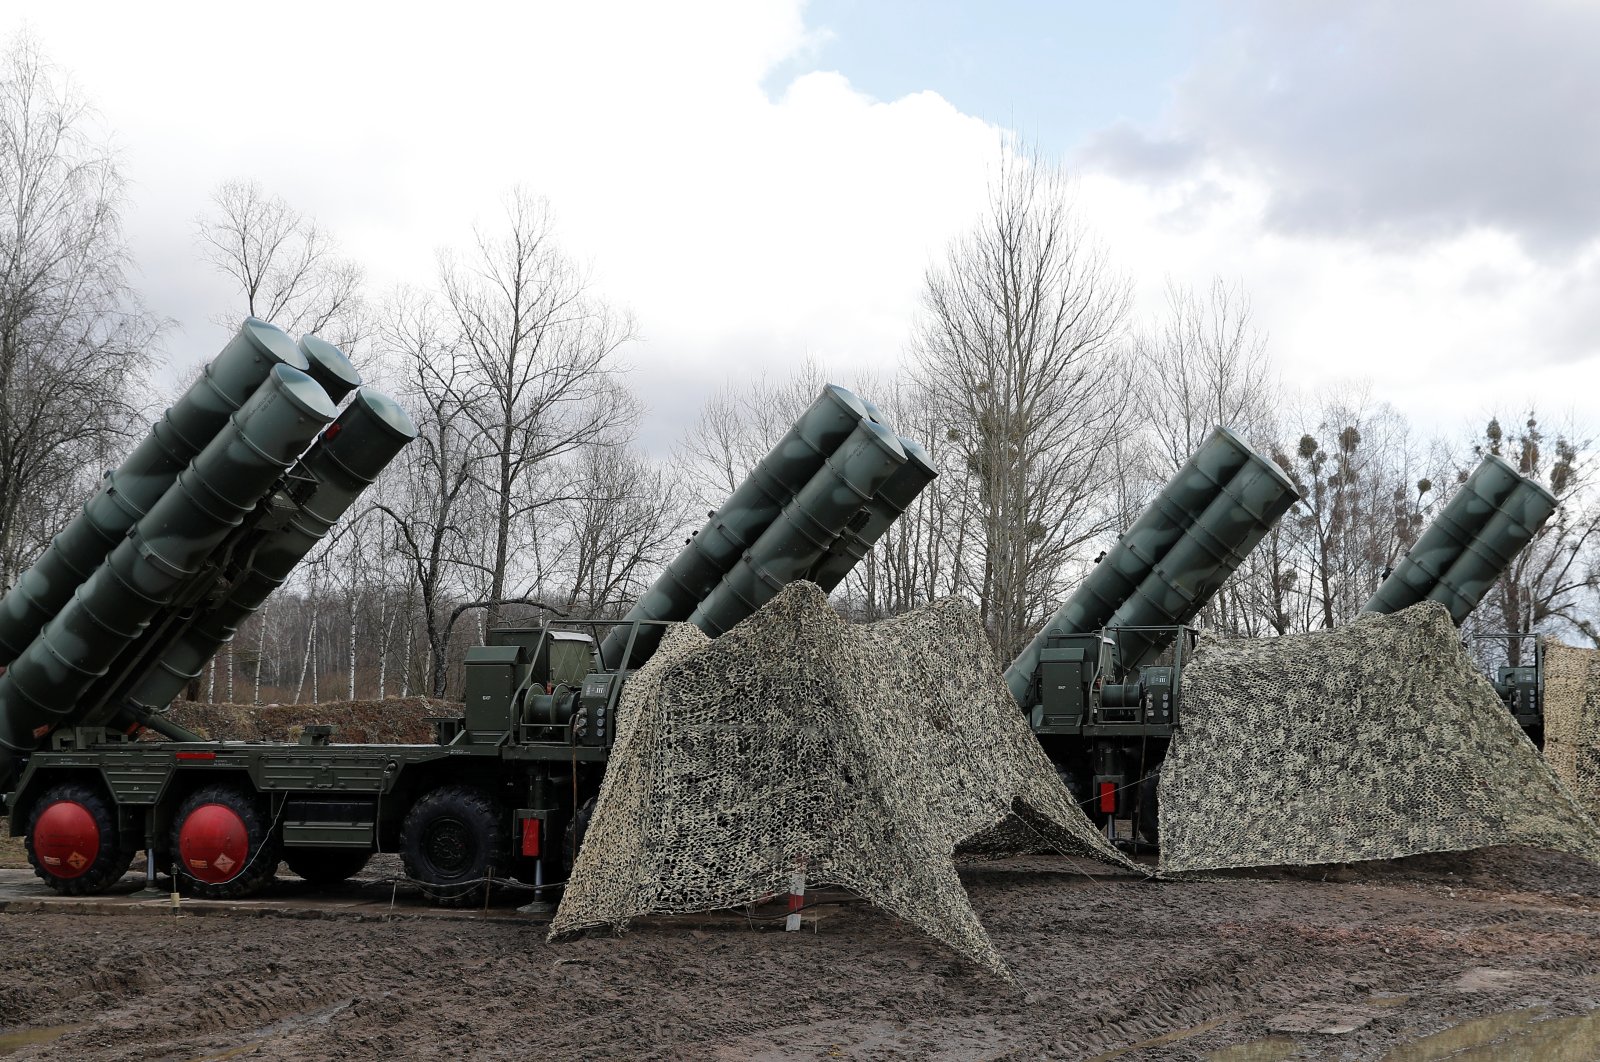 A view shows a new S-400 "Triumph" surface-to-air missile system after its deployment at a military base outside the town of Gvardeysk near Kaliningrad, Russia, March 11, 2019. (Reuters Photo)